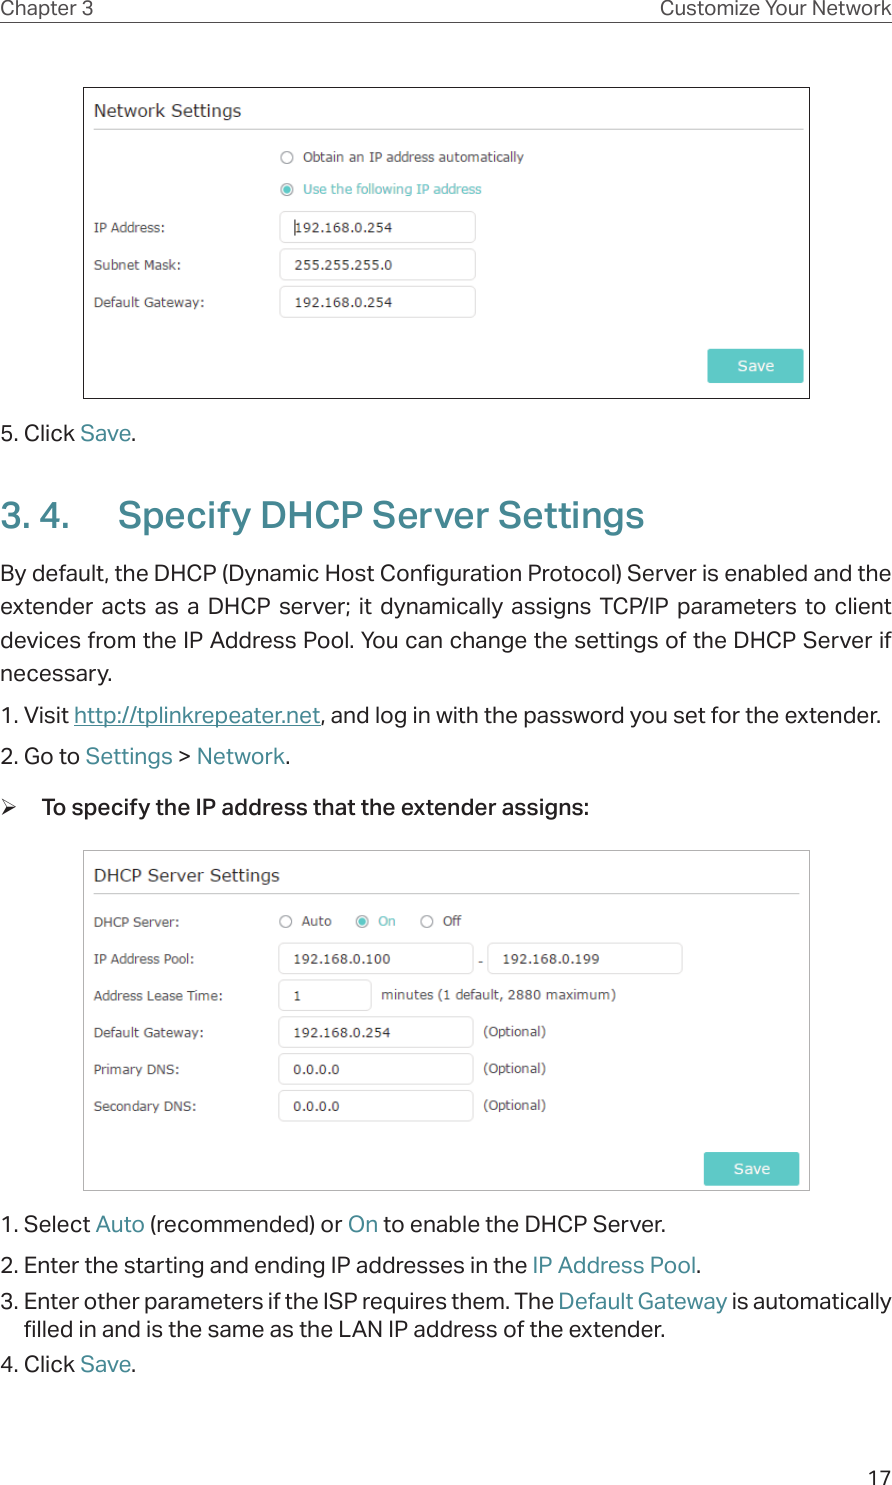 17Chapter 3 Customize Your Network5. Click Save. 3. 4.  Specify DHCP Server SettingsBy default, the DHCP (Dynamic Host Configuration Protocol) Server is enabled and the extender acts as a DHCP server; it dynamically assigns TCP/IP parameters to client devices from the IP Address Pool. You can change the settings of the DHCP Server if necessary.1. Visit http://tplinkrepeater.net, and log in with the password you set for the extender.2. Go to Settings &gt; Network. ¾To specify the IP address that the extender assigns:1. Select Auto (recommended) or On to enable the DHCP Server.2. Enter the starting and ending IP addresses in the IP Address Pool.3. Enter other parameters if the ISP requires them. The Default Gateway is automatically filled in and is the same as the LAN IP address of the extender.4. Click Save.